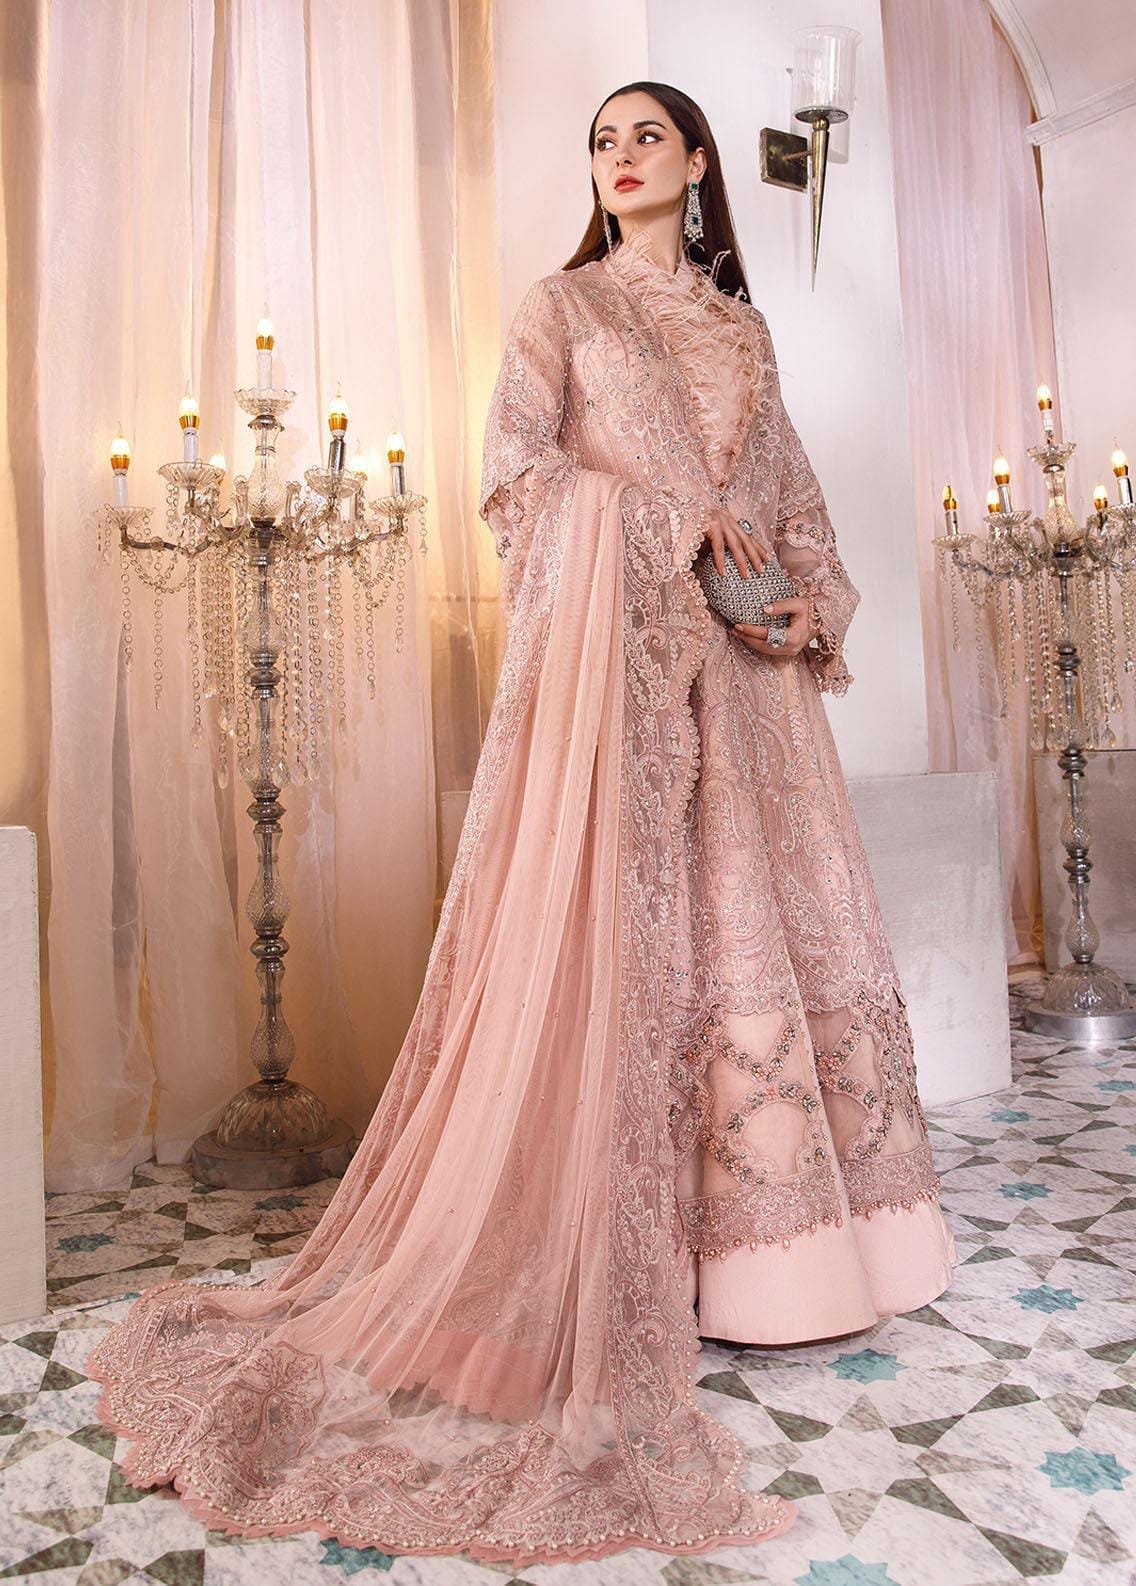 8 Designer Dress Styles that All Pakistanis Should Own